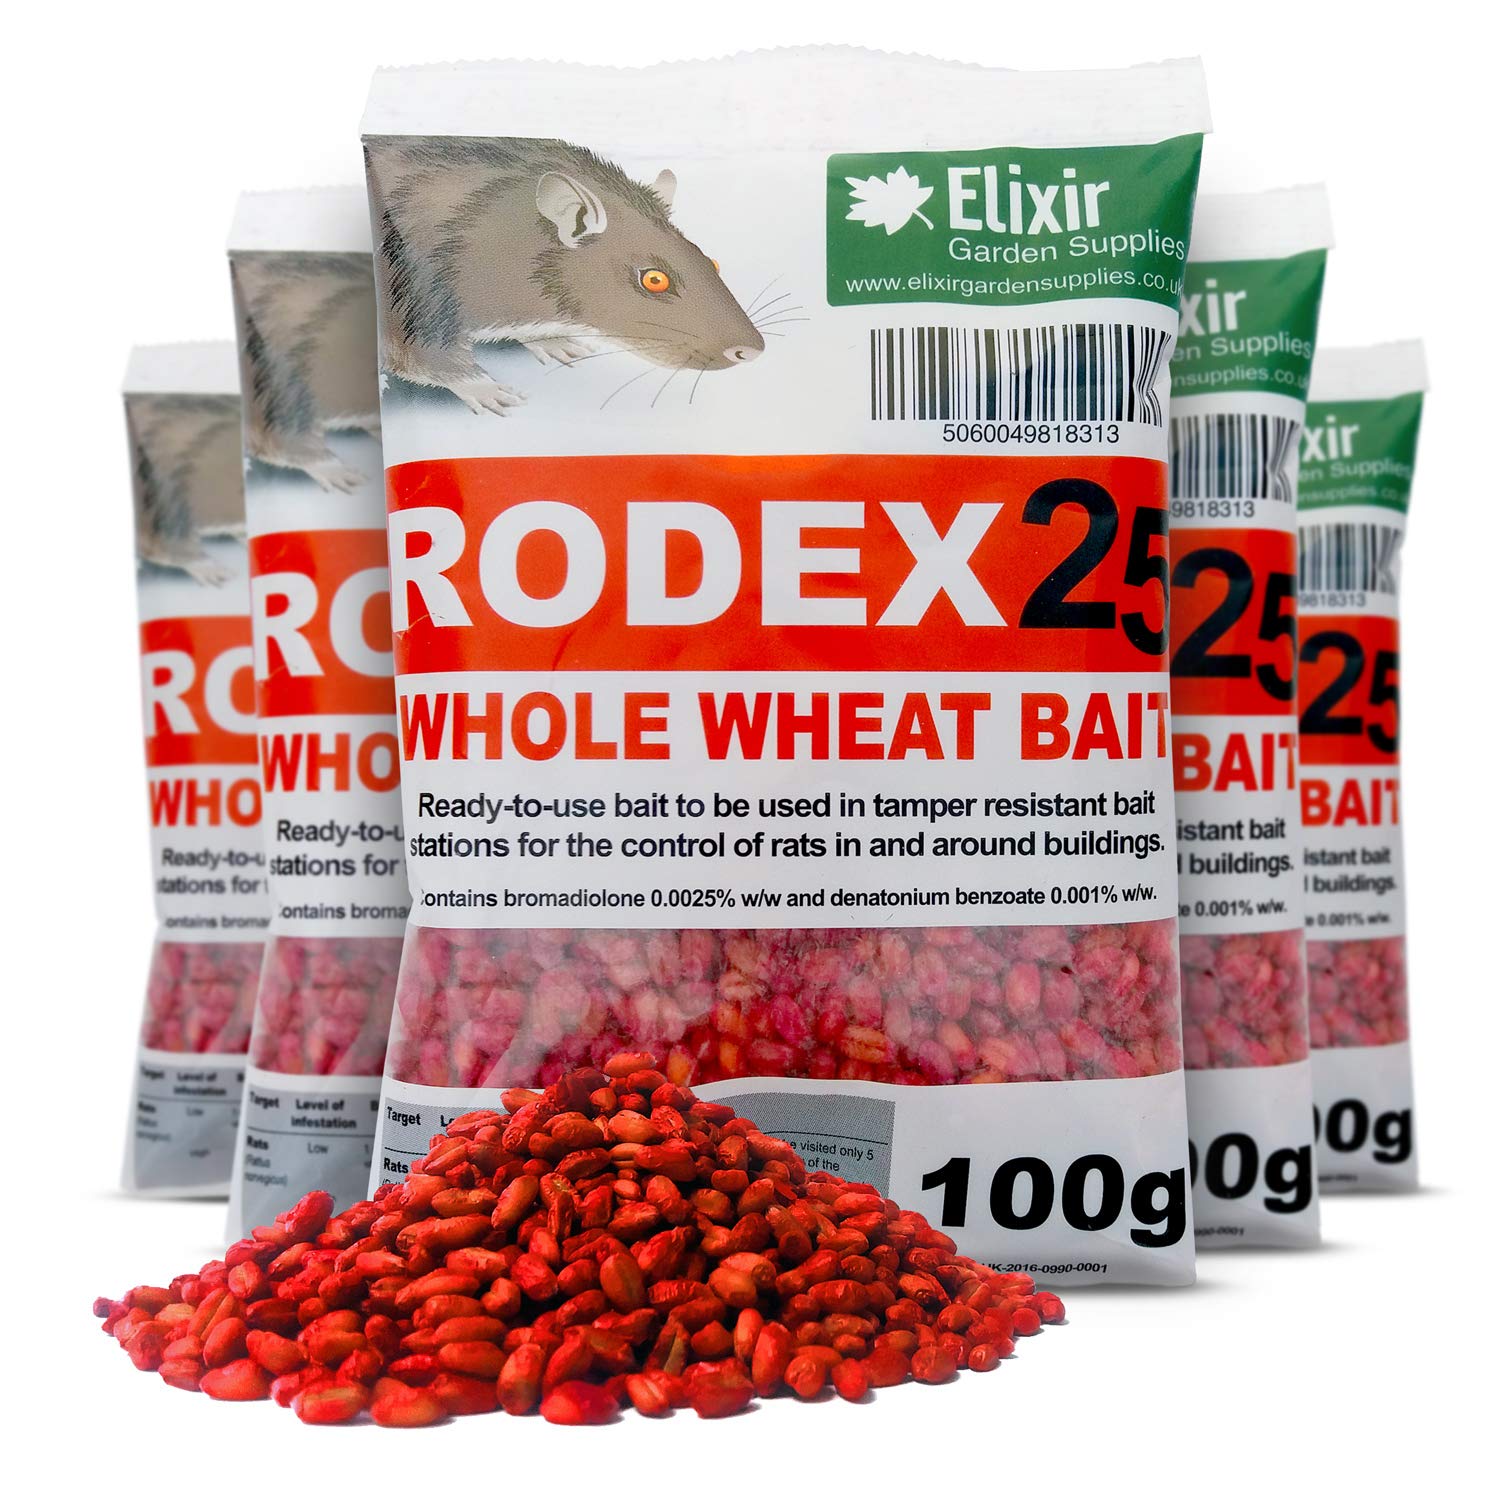 Buy Rat Poison Killing: The 5 Best Products for Effective Elimination